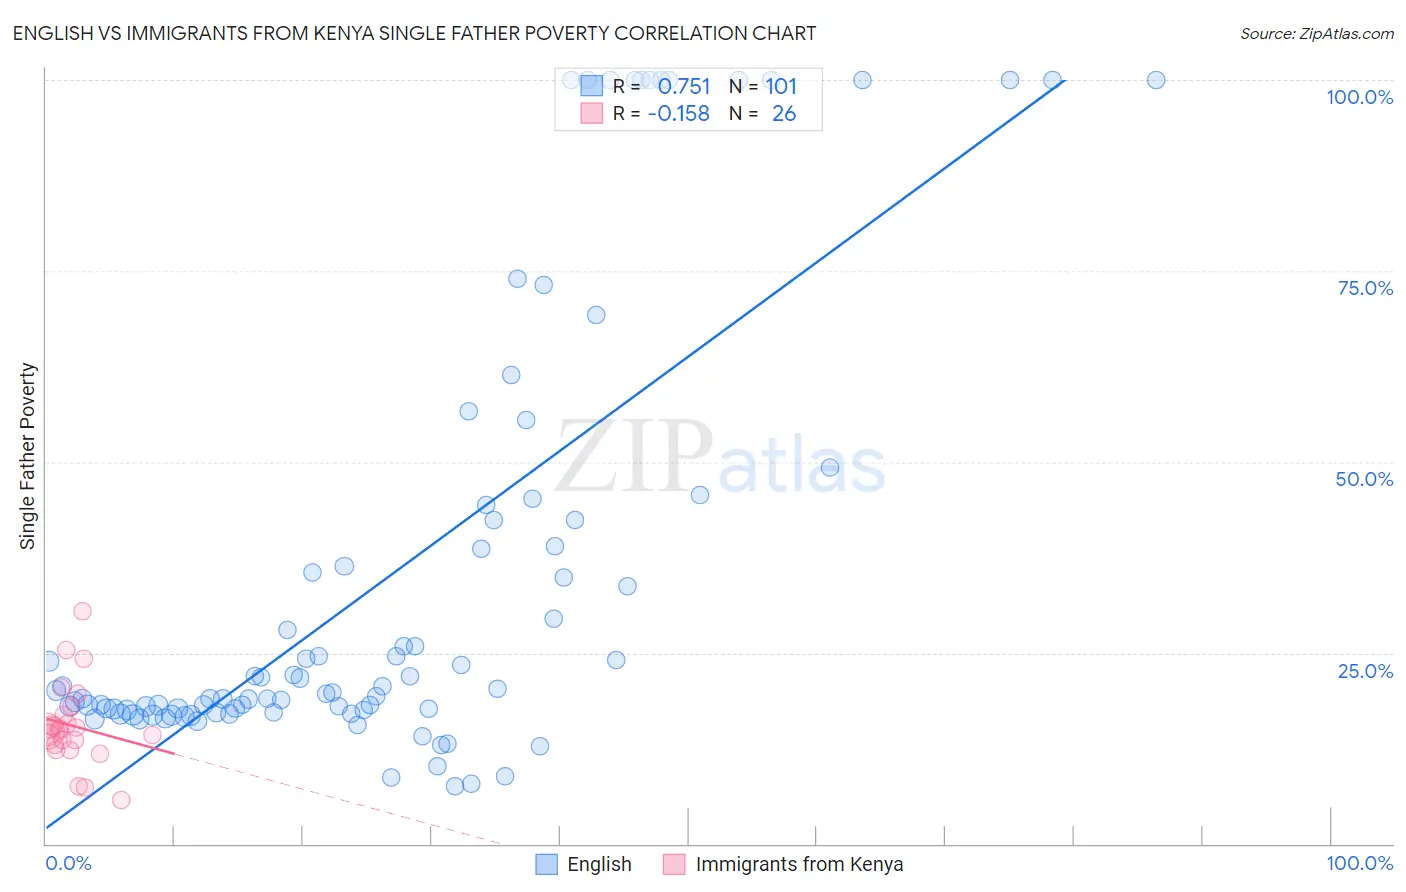 English vs Immigrants from Kenya Single Father Poverty